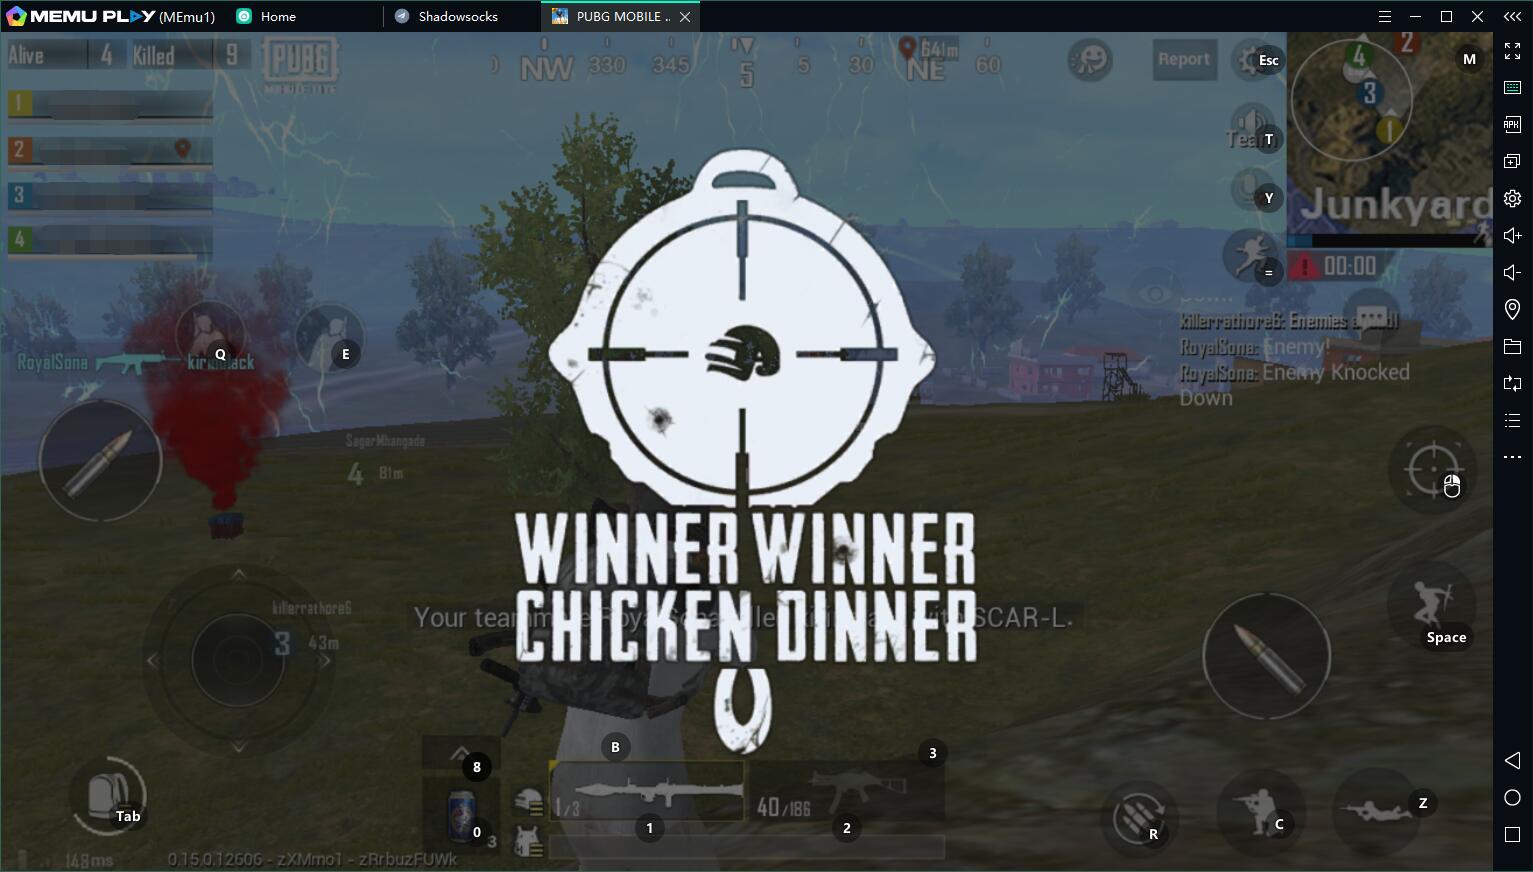 Best Emulator to Play PUBG Mobile Lite on PC PC